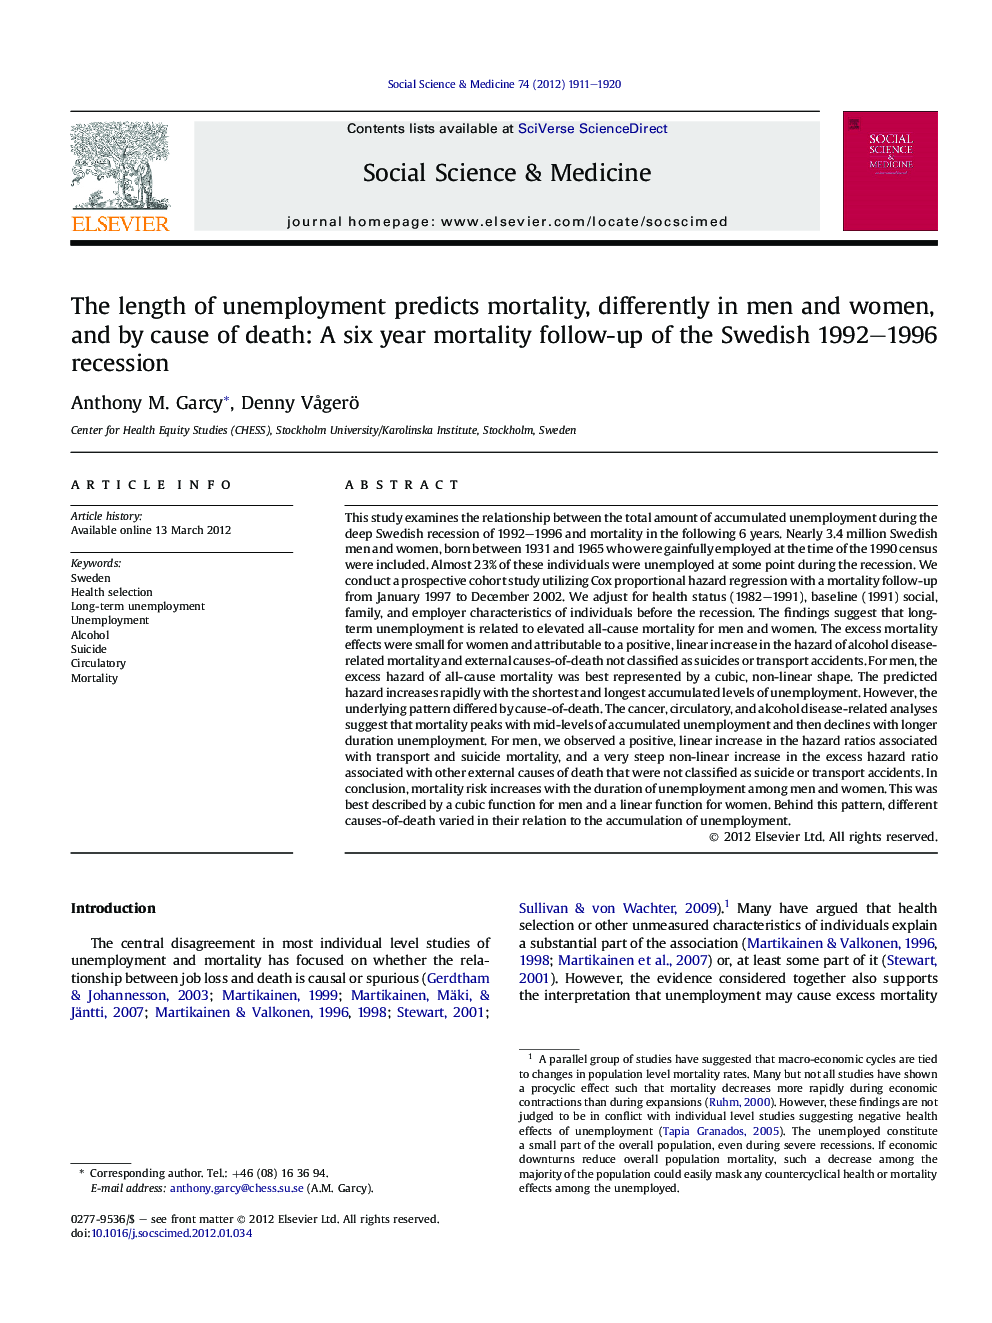 The length of unemployment predicts mortality, differently in men and women, and by cause of death: A six year mortality follow-up of the Swedish 1992-1996 recession